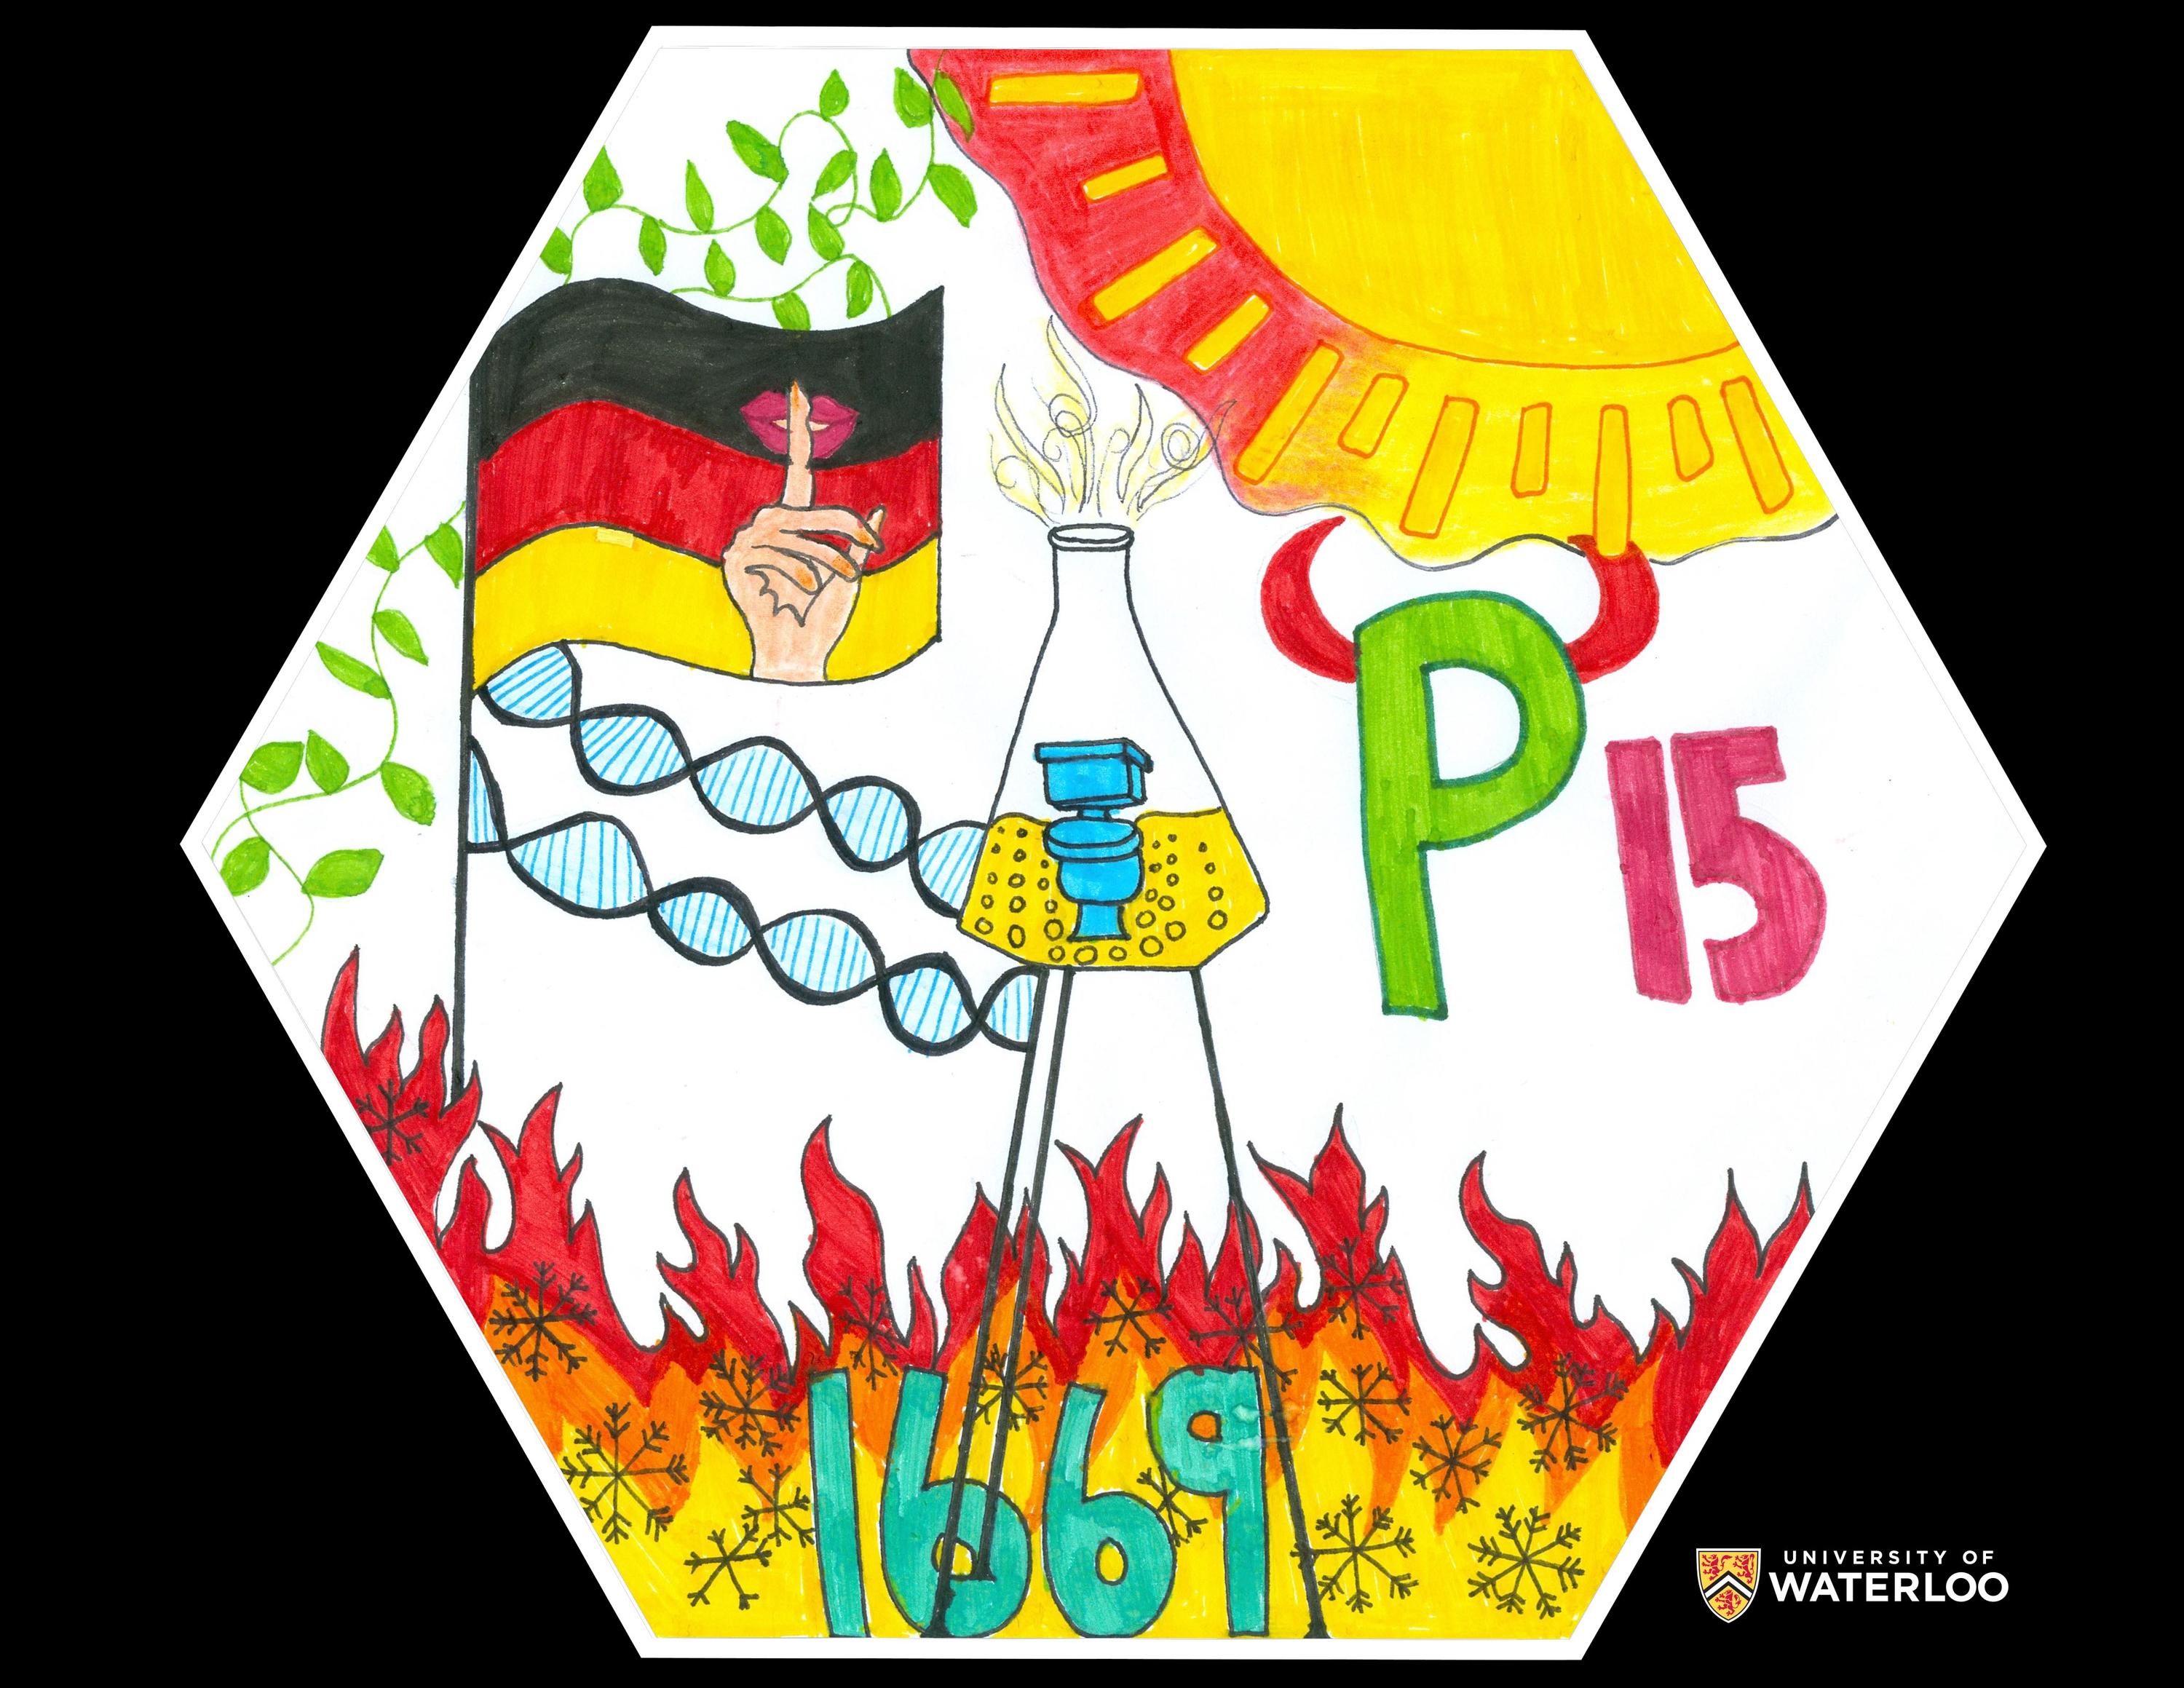 Pen and ink on paper. Chemical symbol “P” and atomic number “15” appear right. All around are symbols of phosphorus and its discovery including a flask of boiling urine, the sun, a DNA helix, a plant, the German flag and someone saying “shhh”, the year “1669”, and snowflakes within flames.